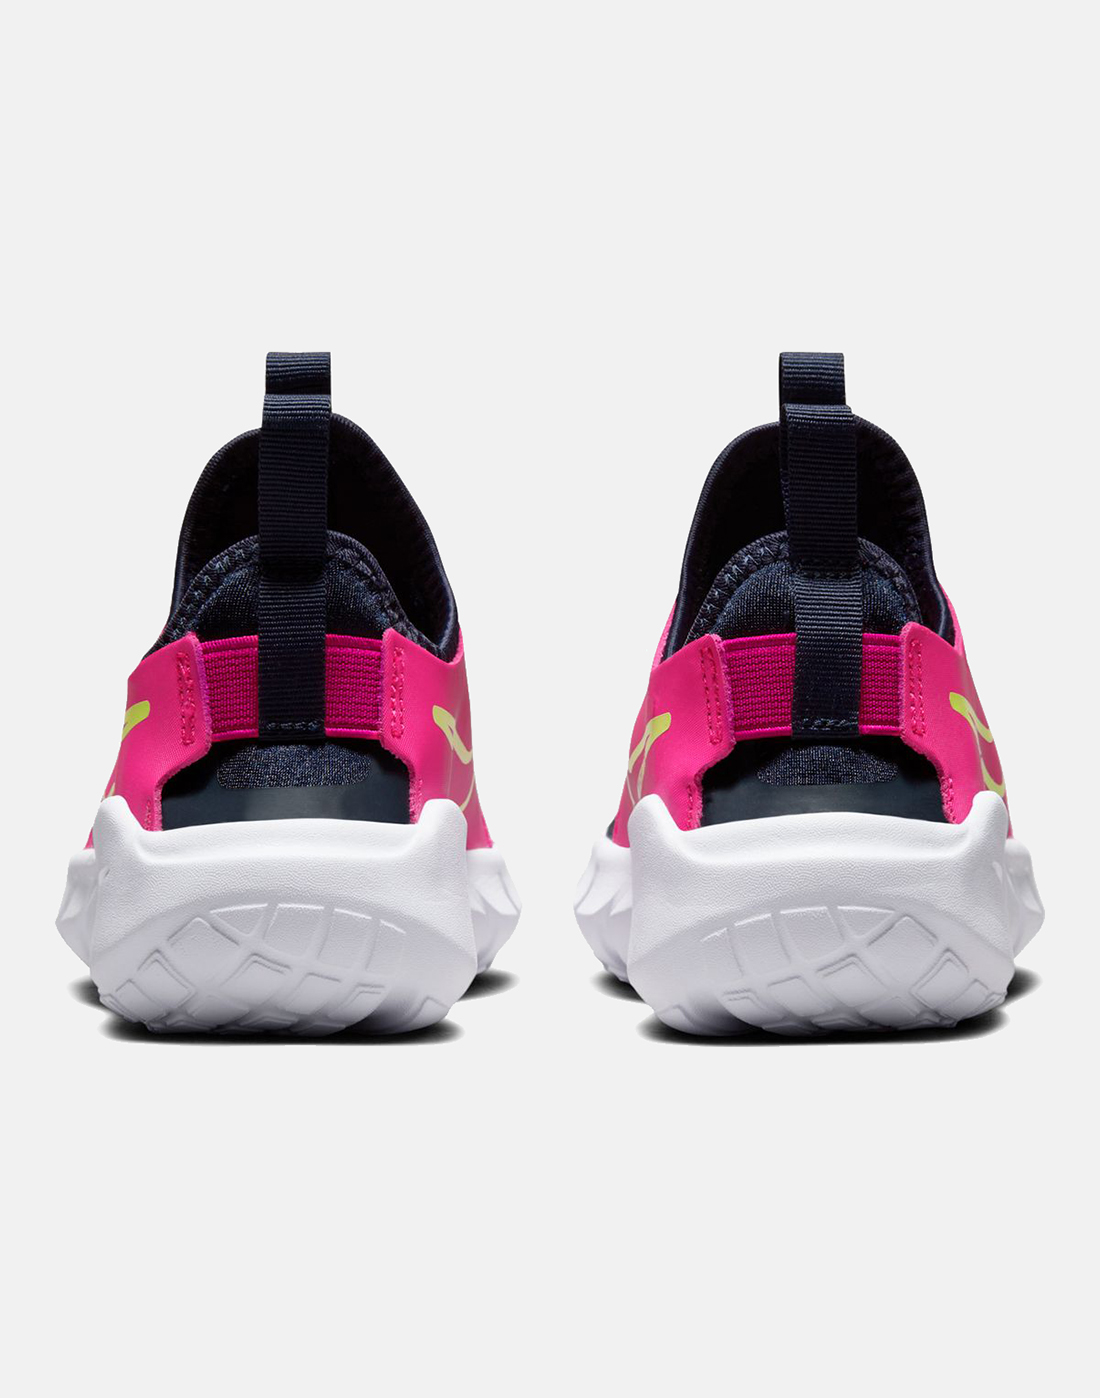 Nike Younger Kids Flex Runner - Pink | Life Style Sports IE